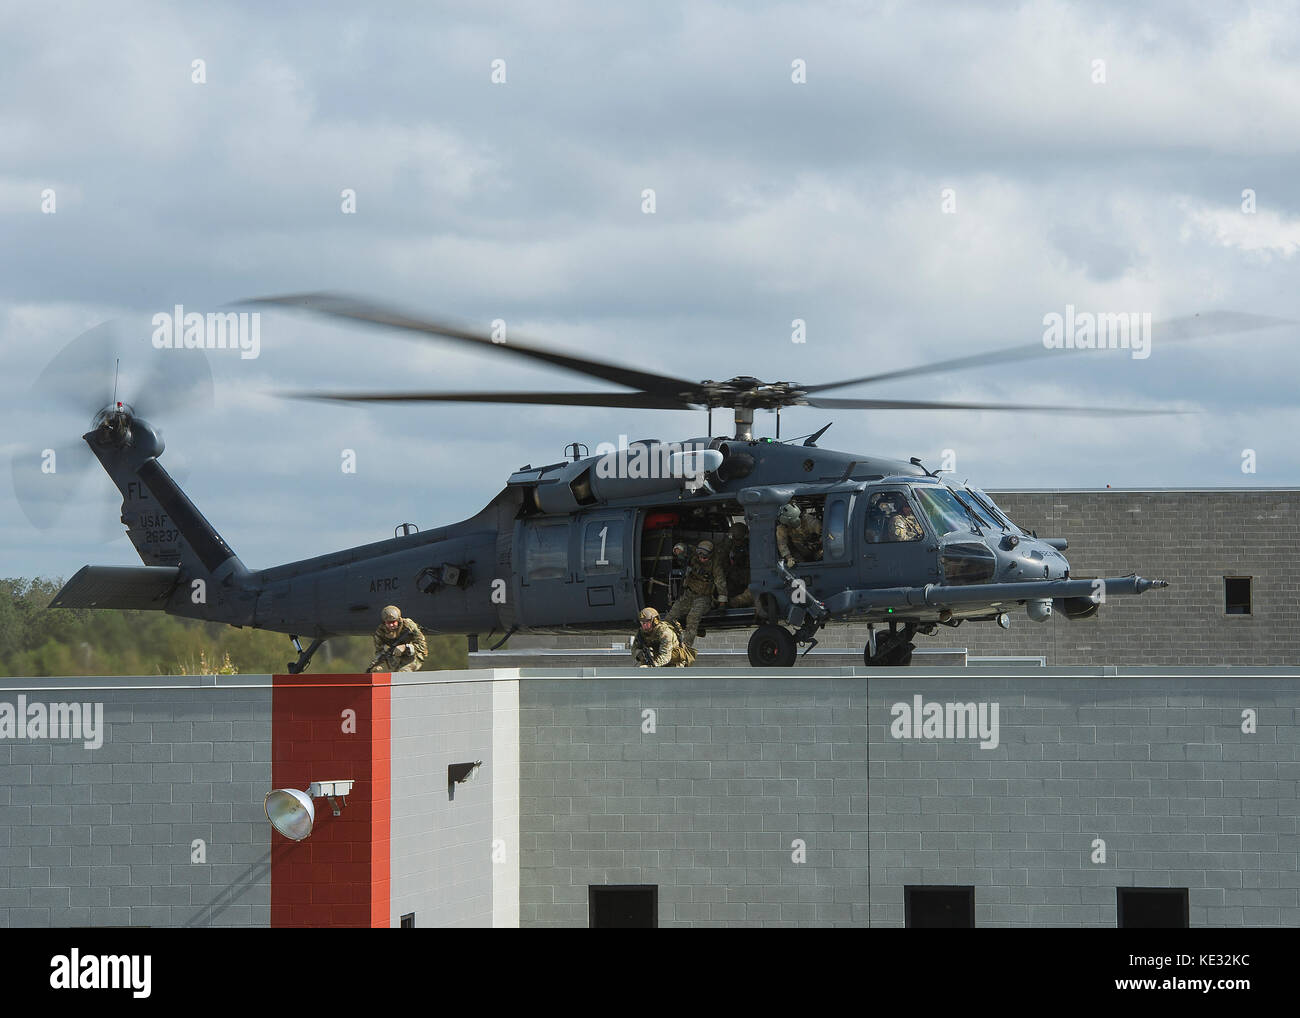 Members of the U.S. Army 20th Special Forces Group infill via a U.S. Air Force HH-60 Pave Hawk helicopter Stock Photo